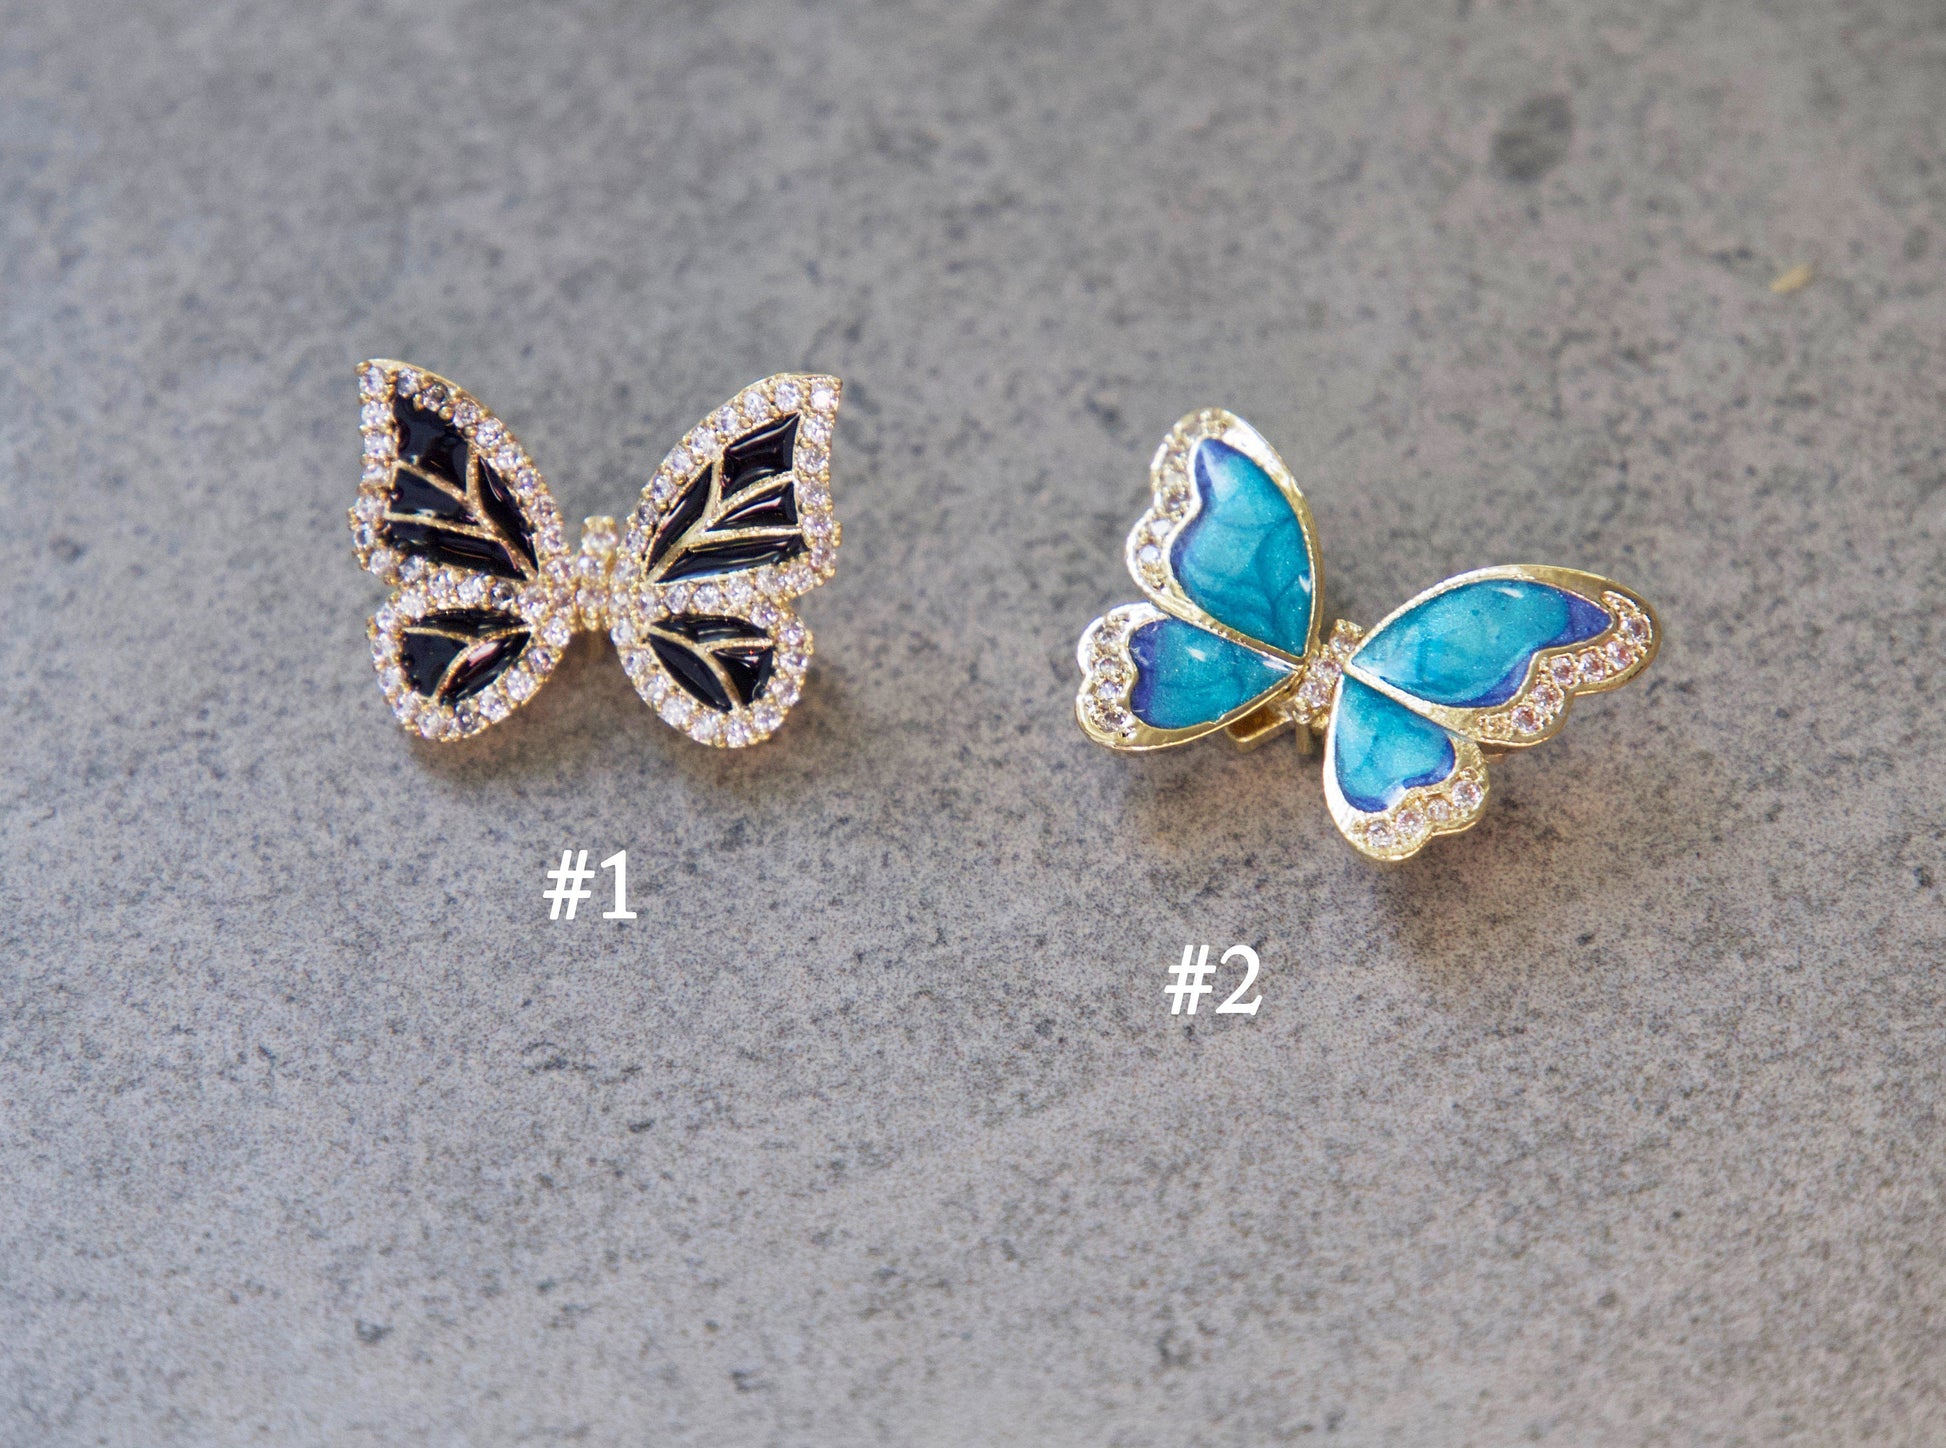 Ethereal Butterfly 3D Zircon Crystal Nail Ornament Decal 14k Gold Waving Wings Instagram Influencer Nail Jewelry Fairy Tale Nail Art